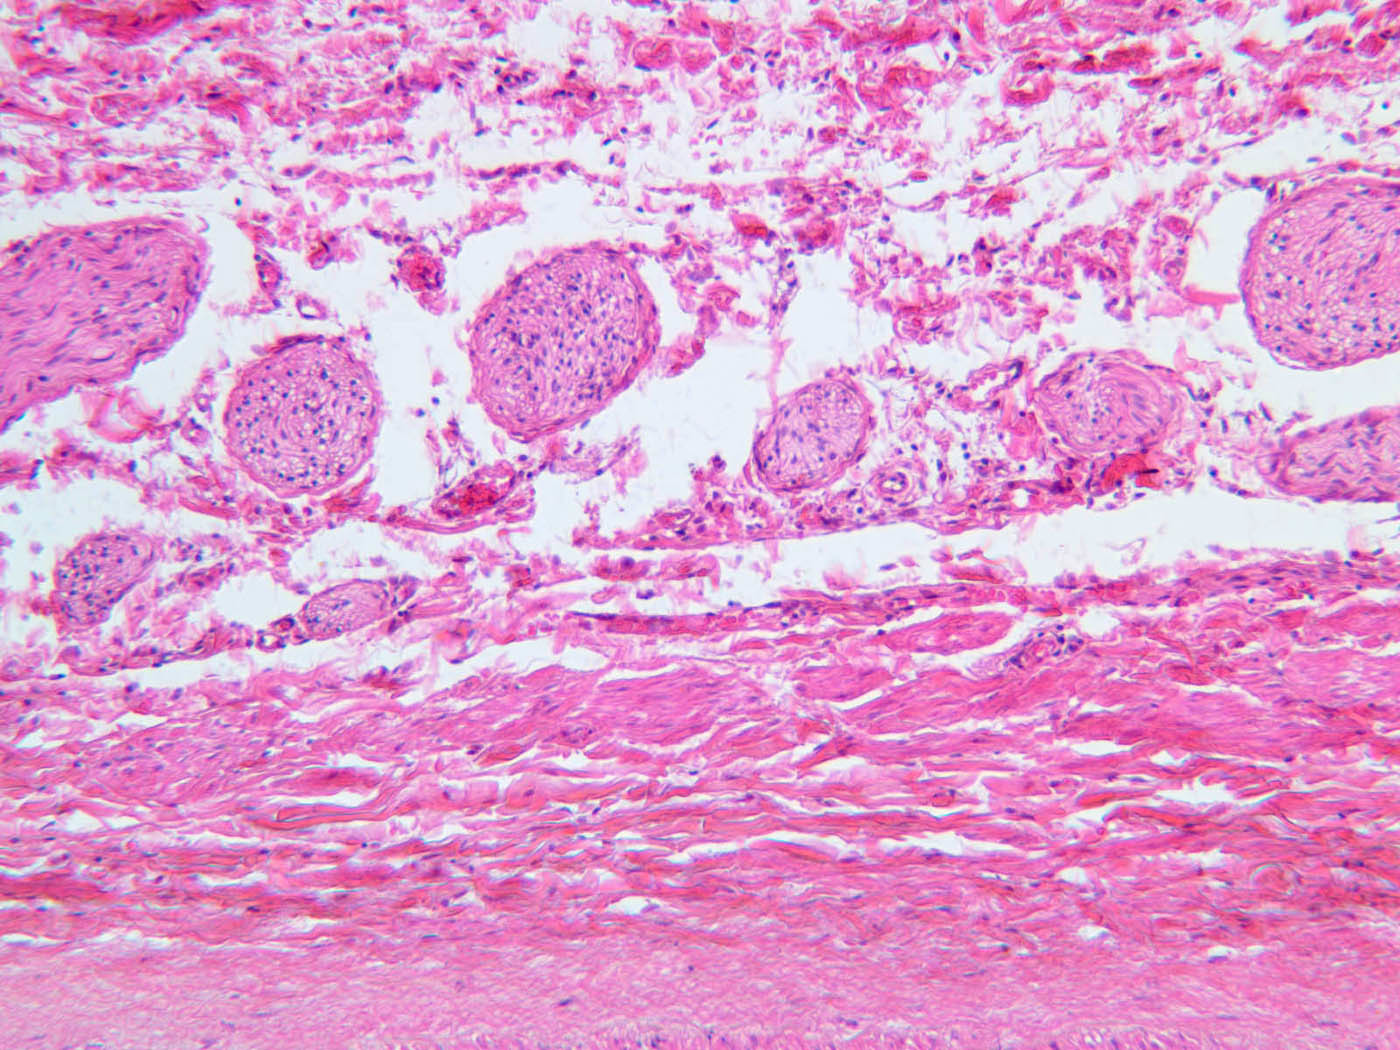 a28 simple squamous epithelium renal artery vein 10x he.jpg